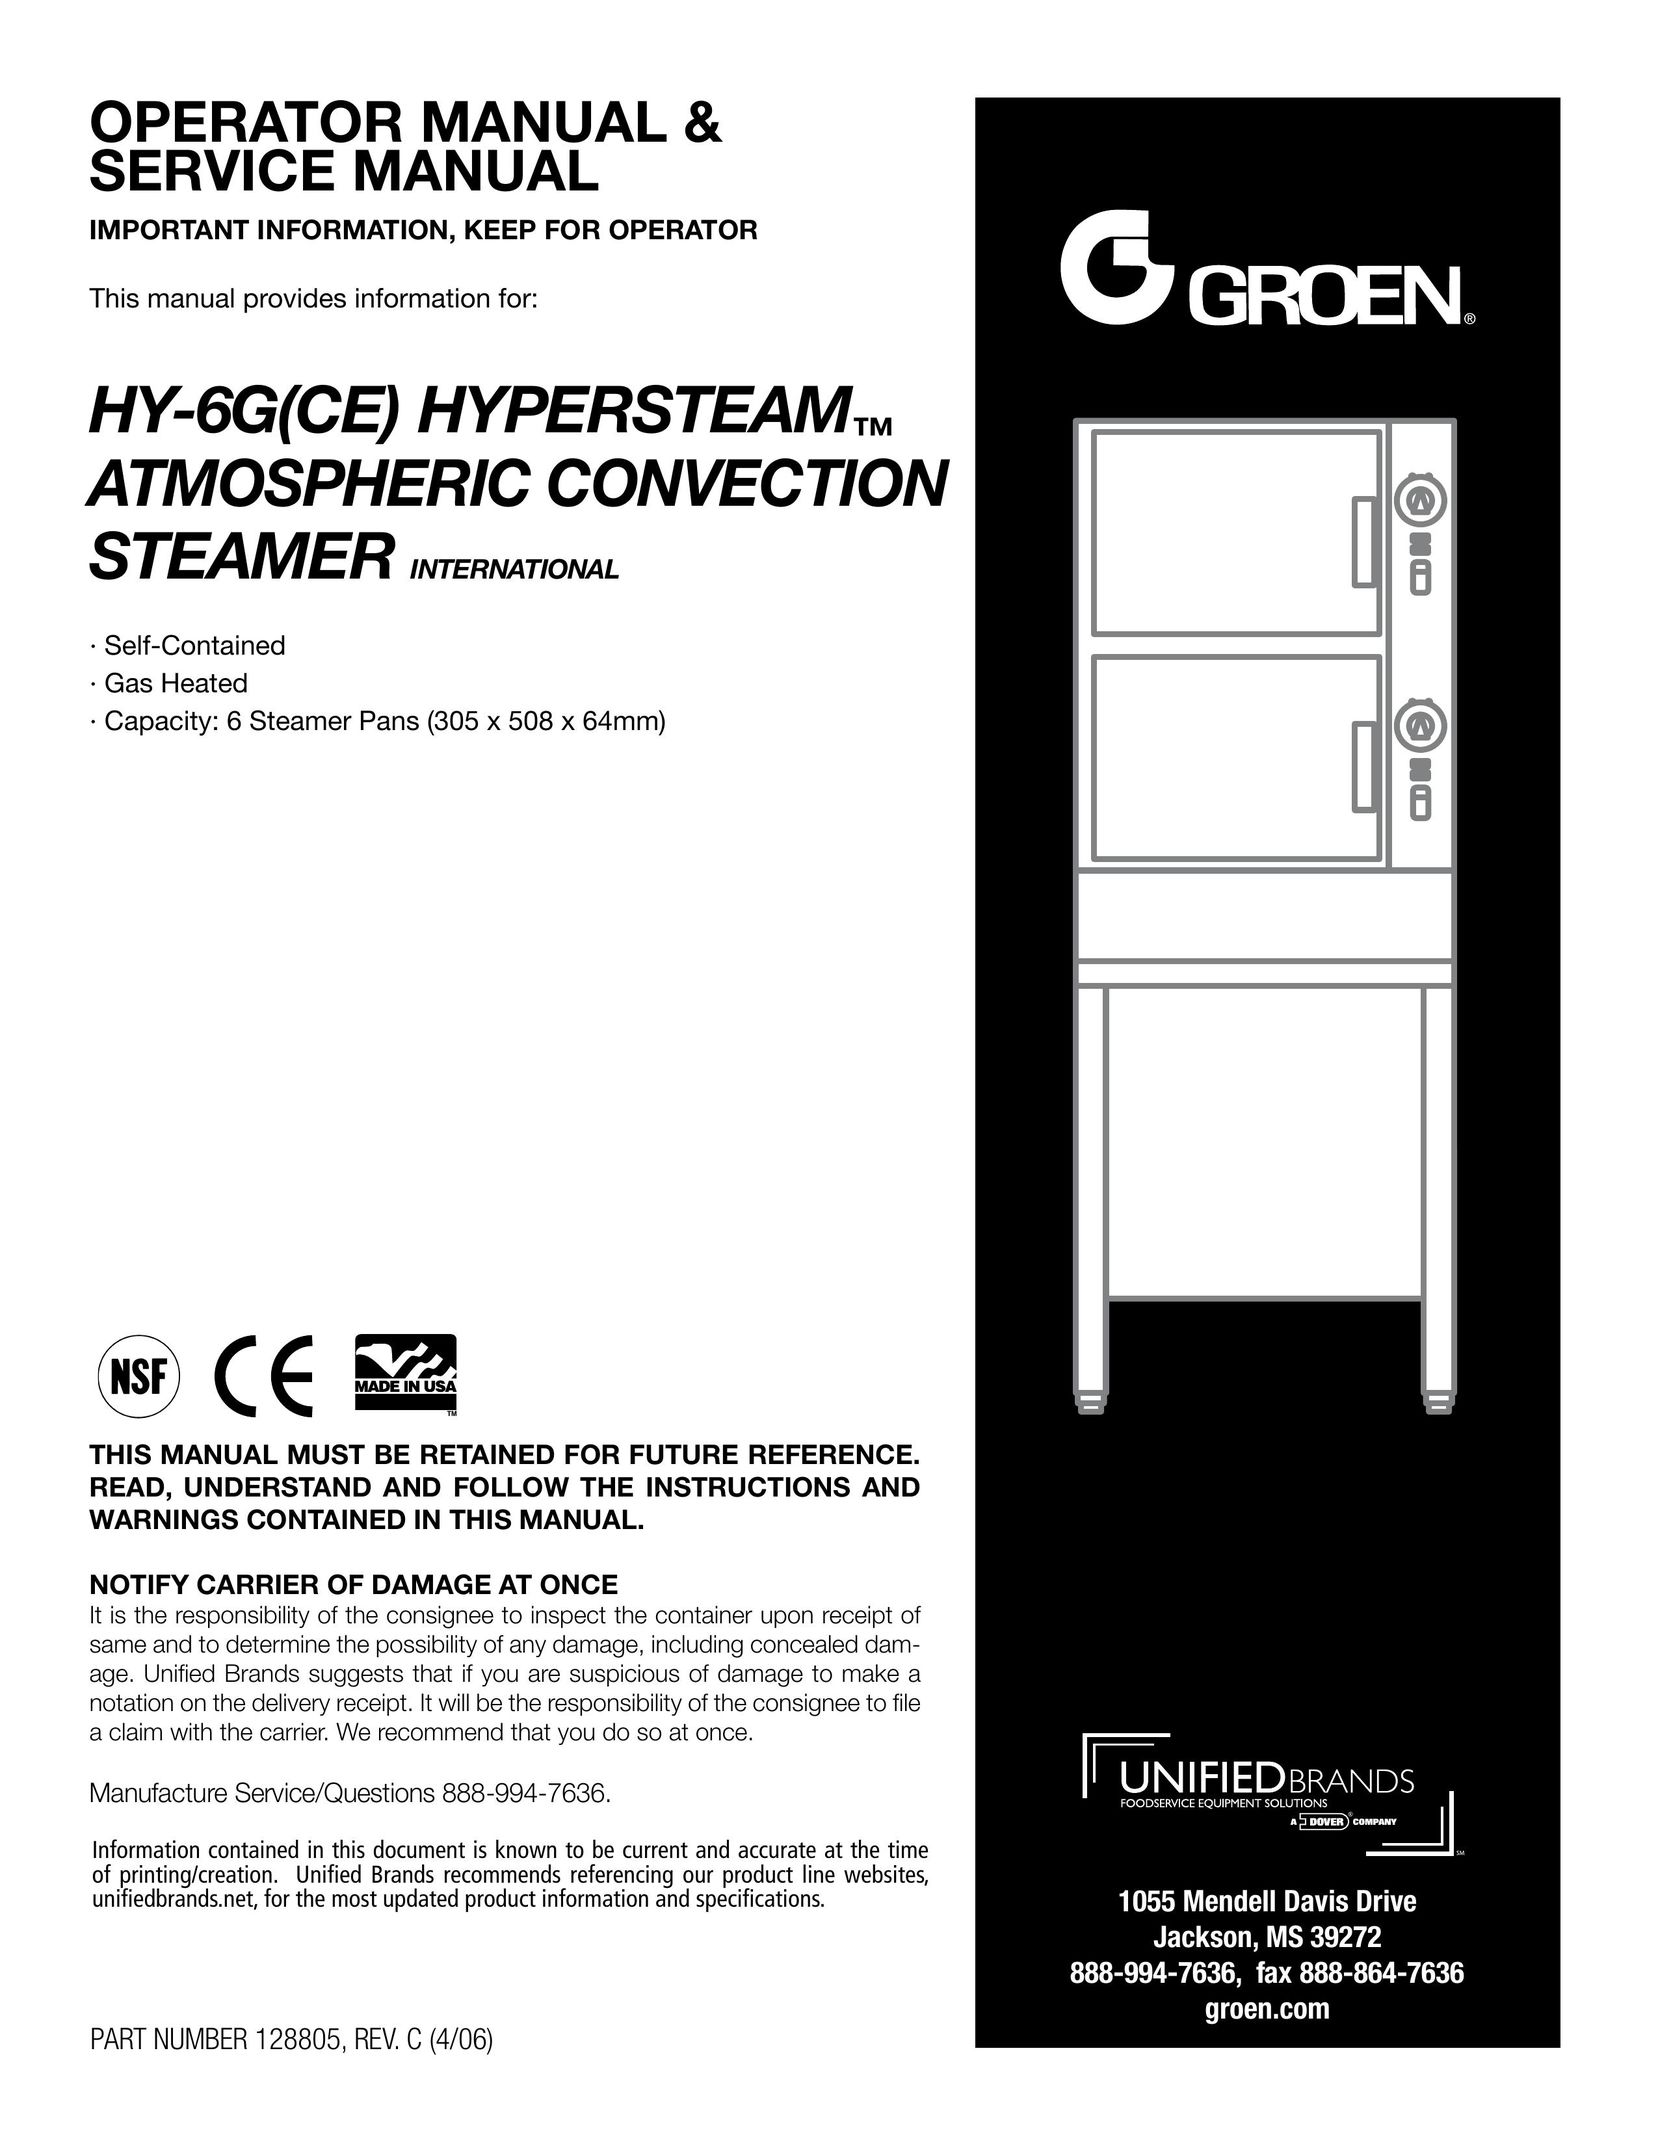 Unified Brands HY-6G(CE) Electric Steamer User Manual